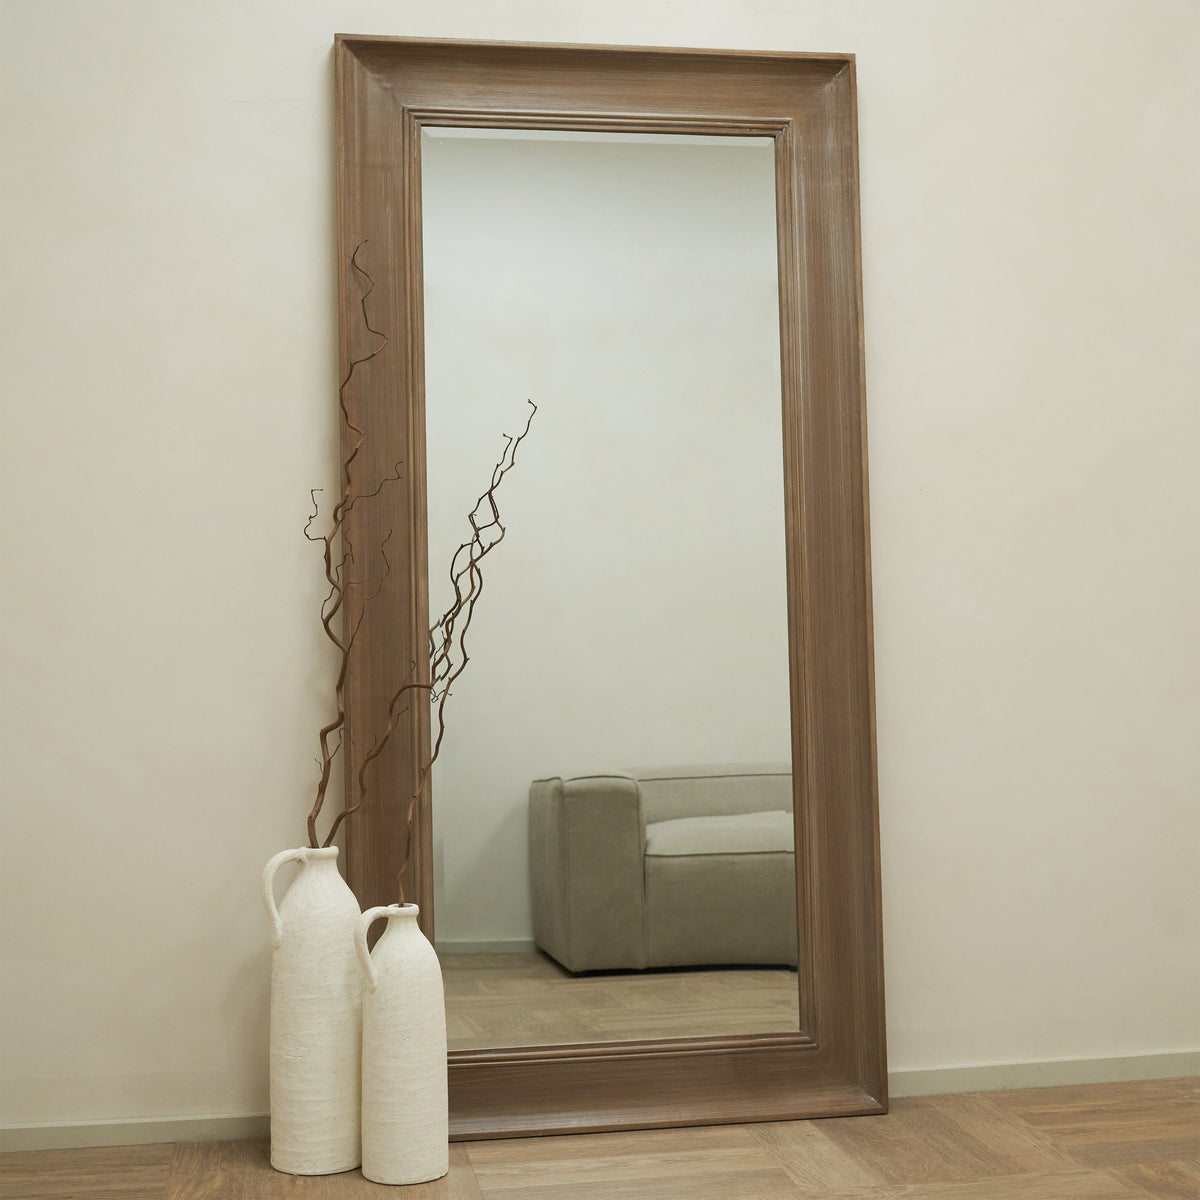 Large Full Length Washed Wood Mirror leaning against wall